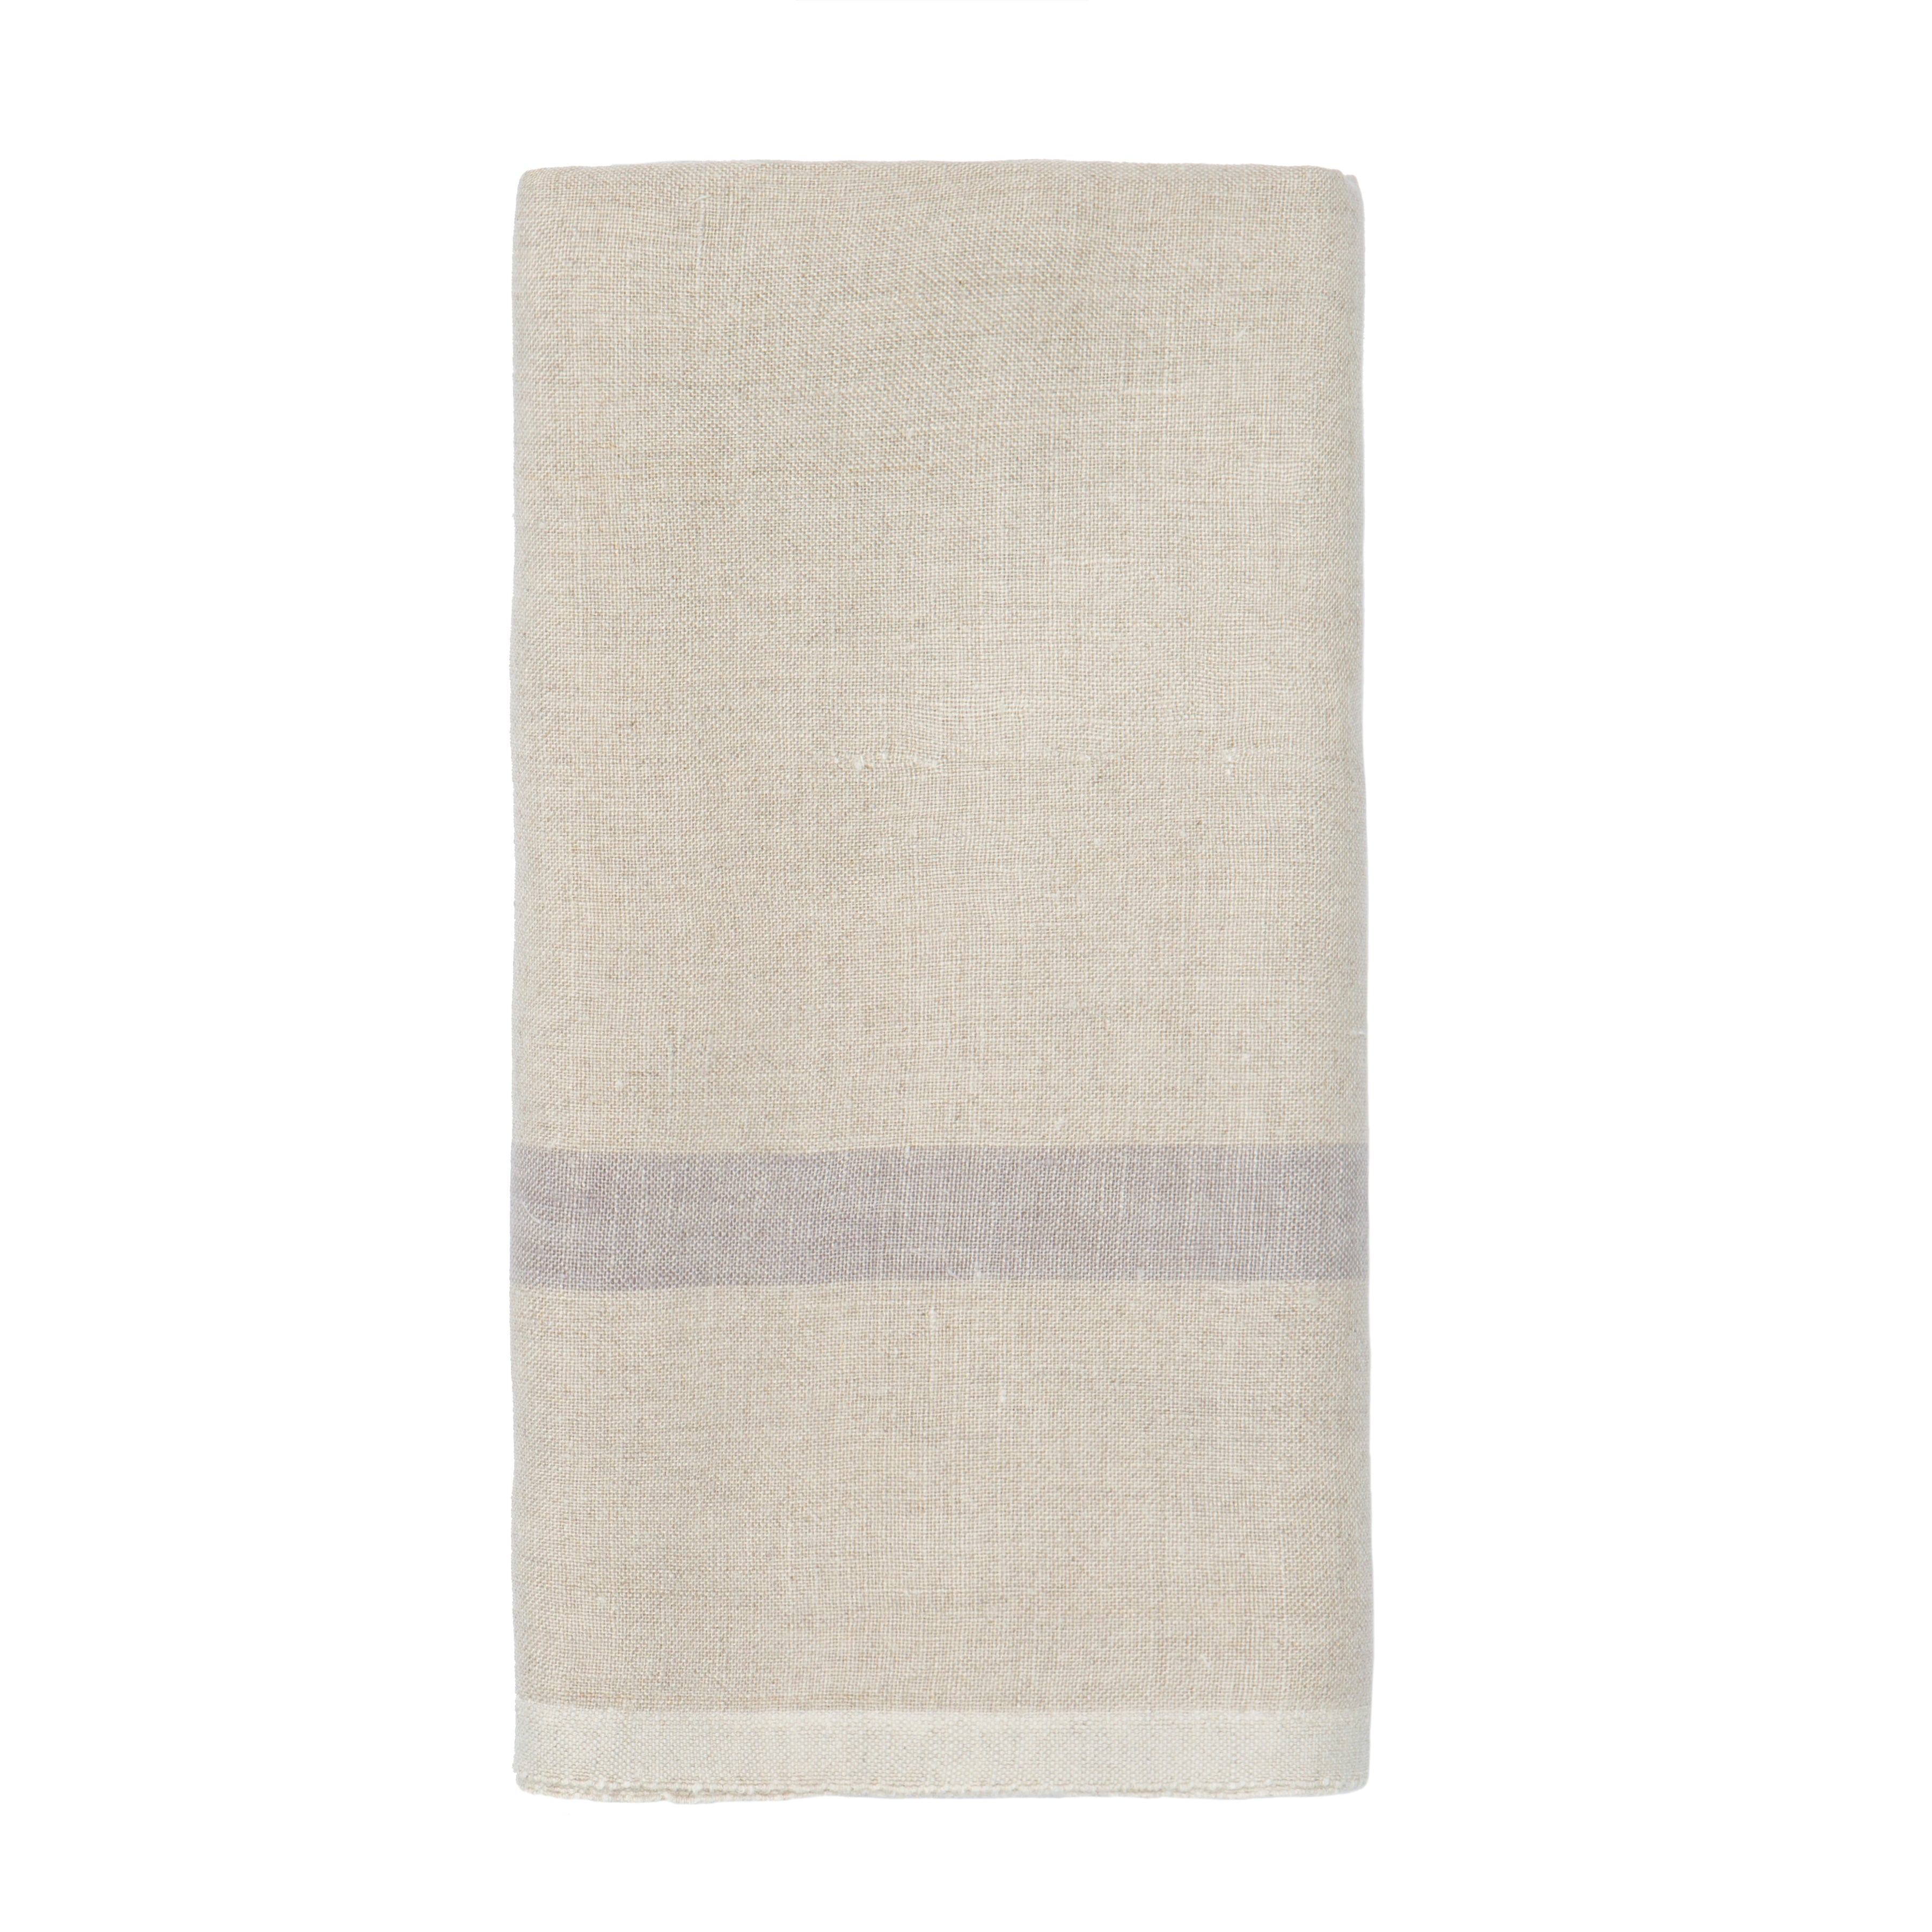 Laundered Linen Towels, Set of 2